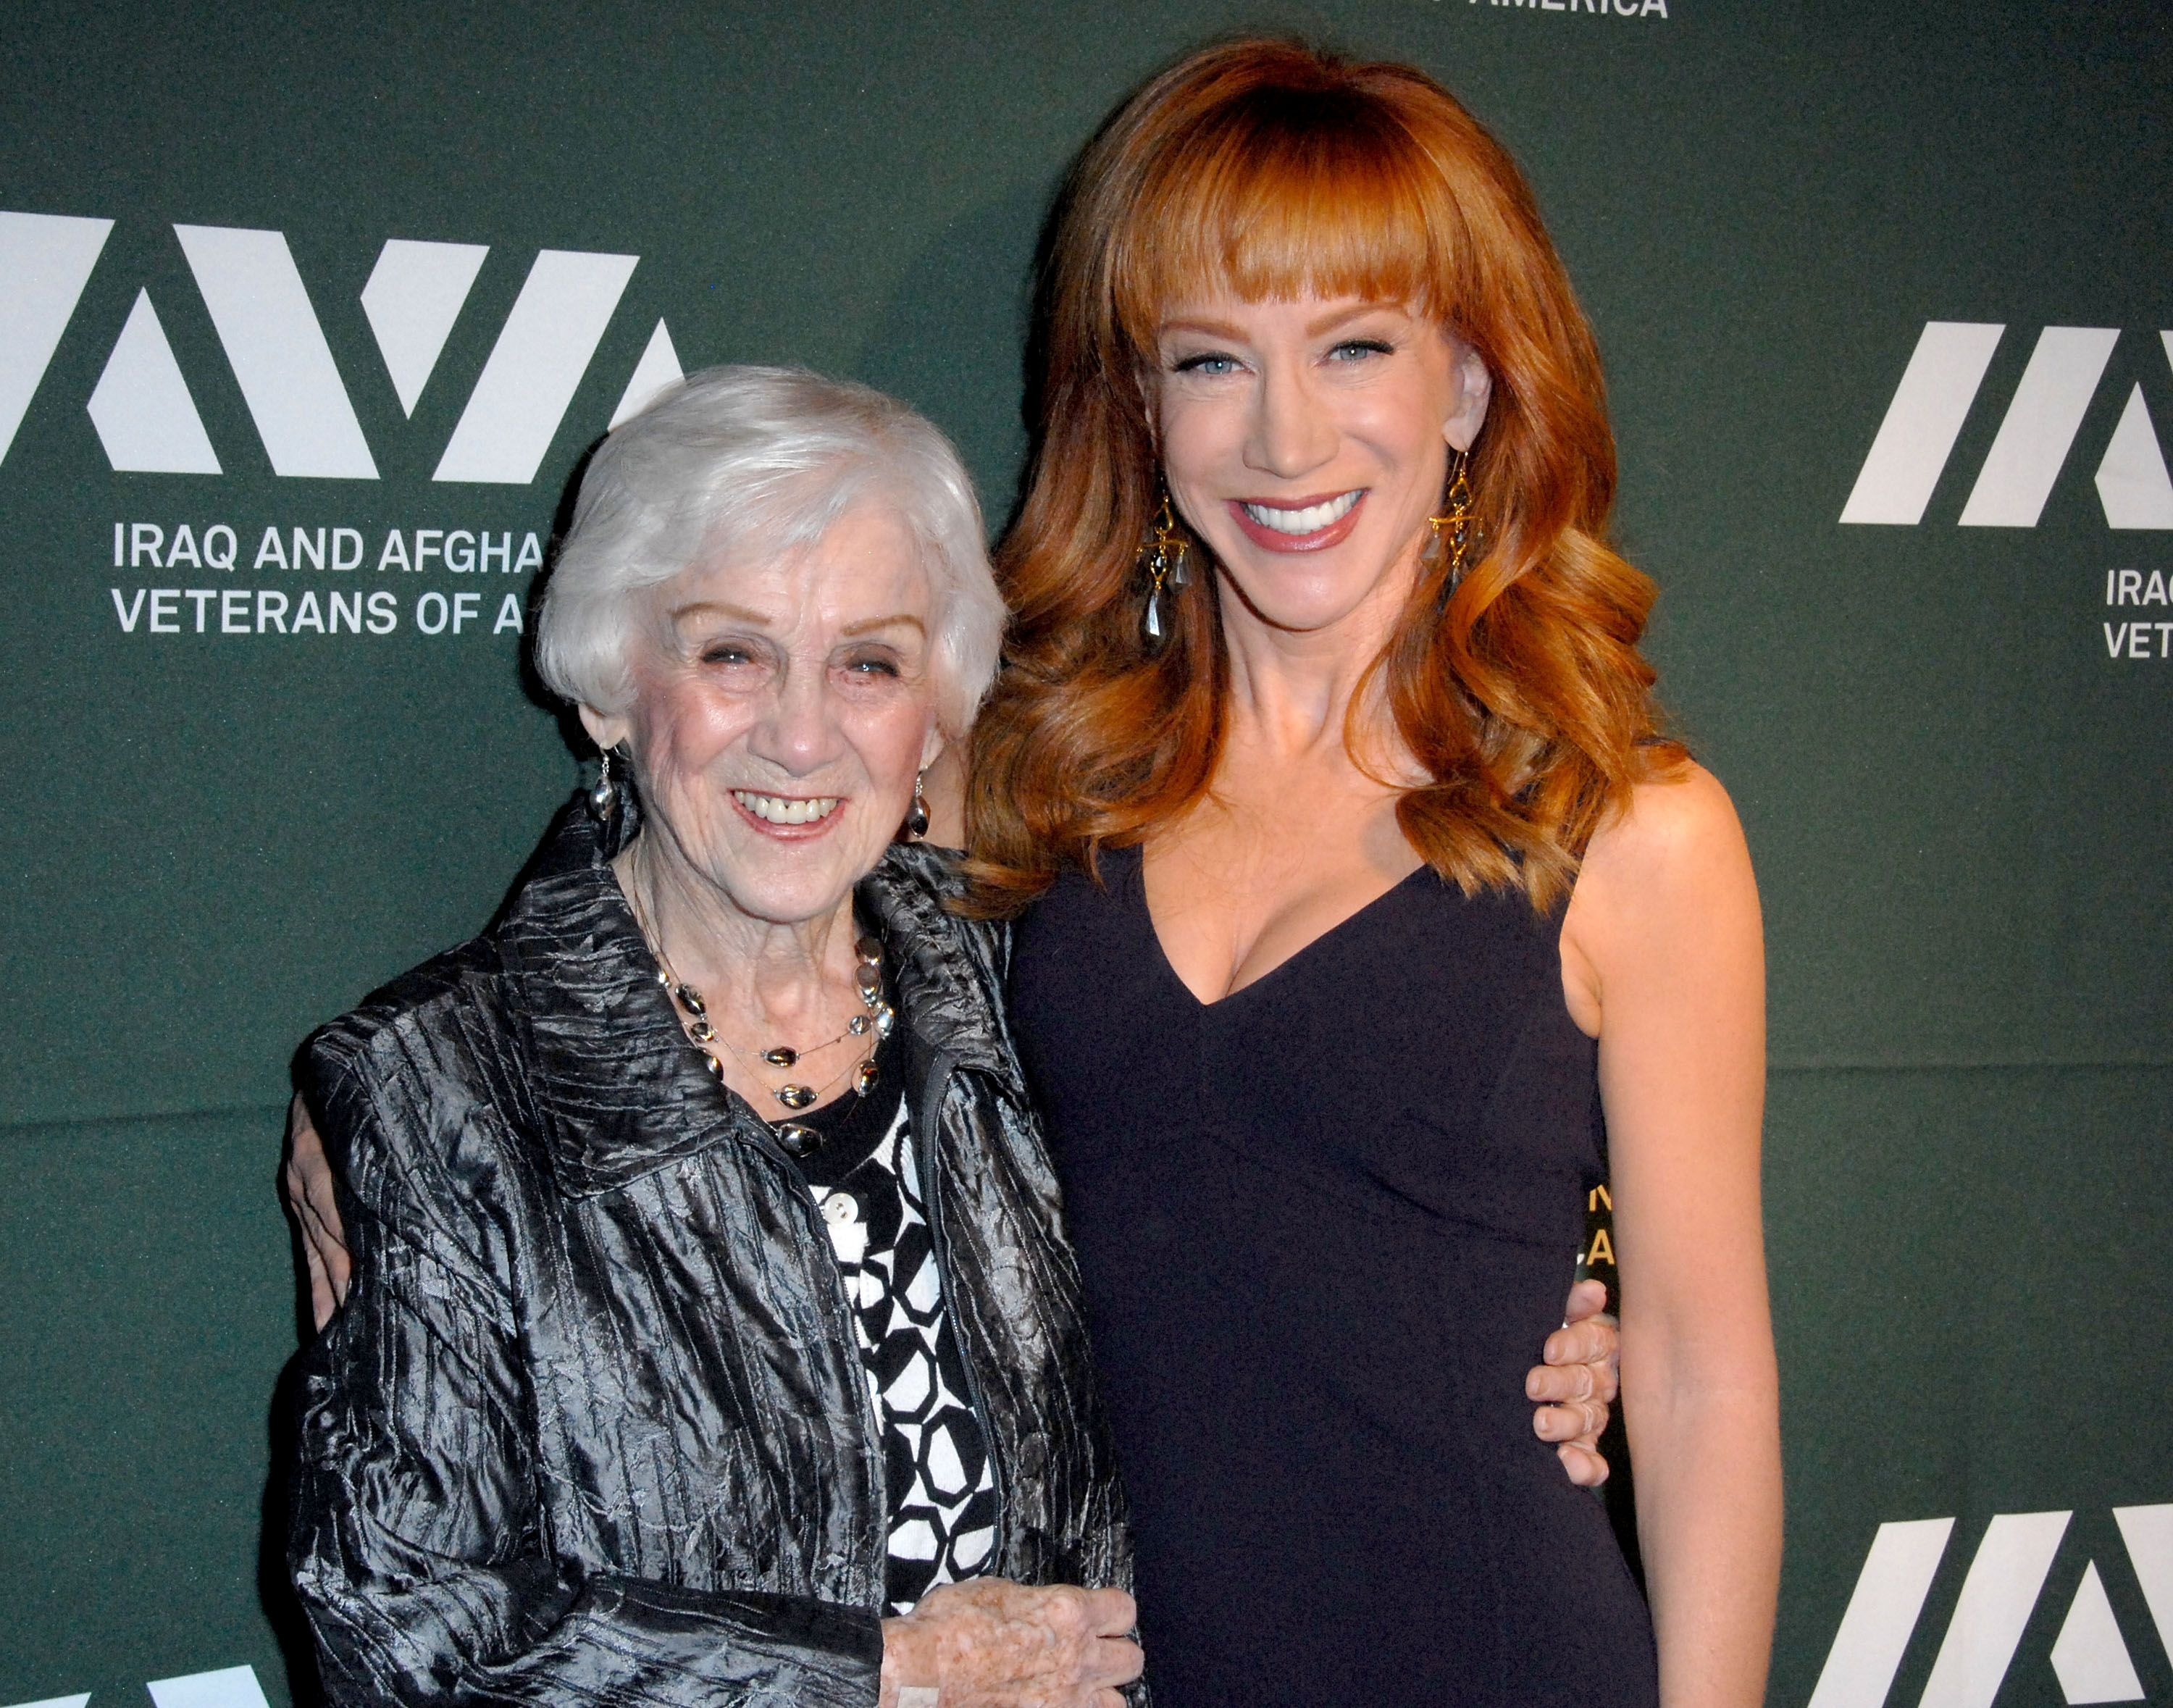 Kathy Griffin and mother Maggie Griffin attend the Iraq And Afghanistan Veterans Of America's 5th Annual Heroes Celebration on May 8, 2013. | Source: Getty Images